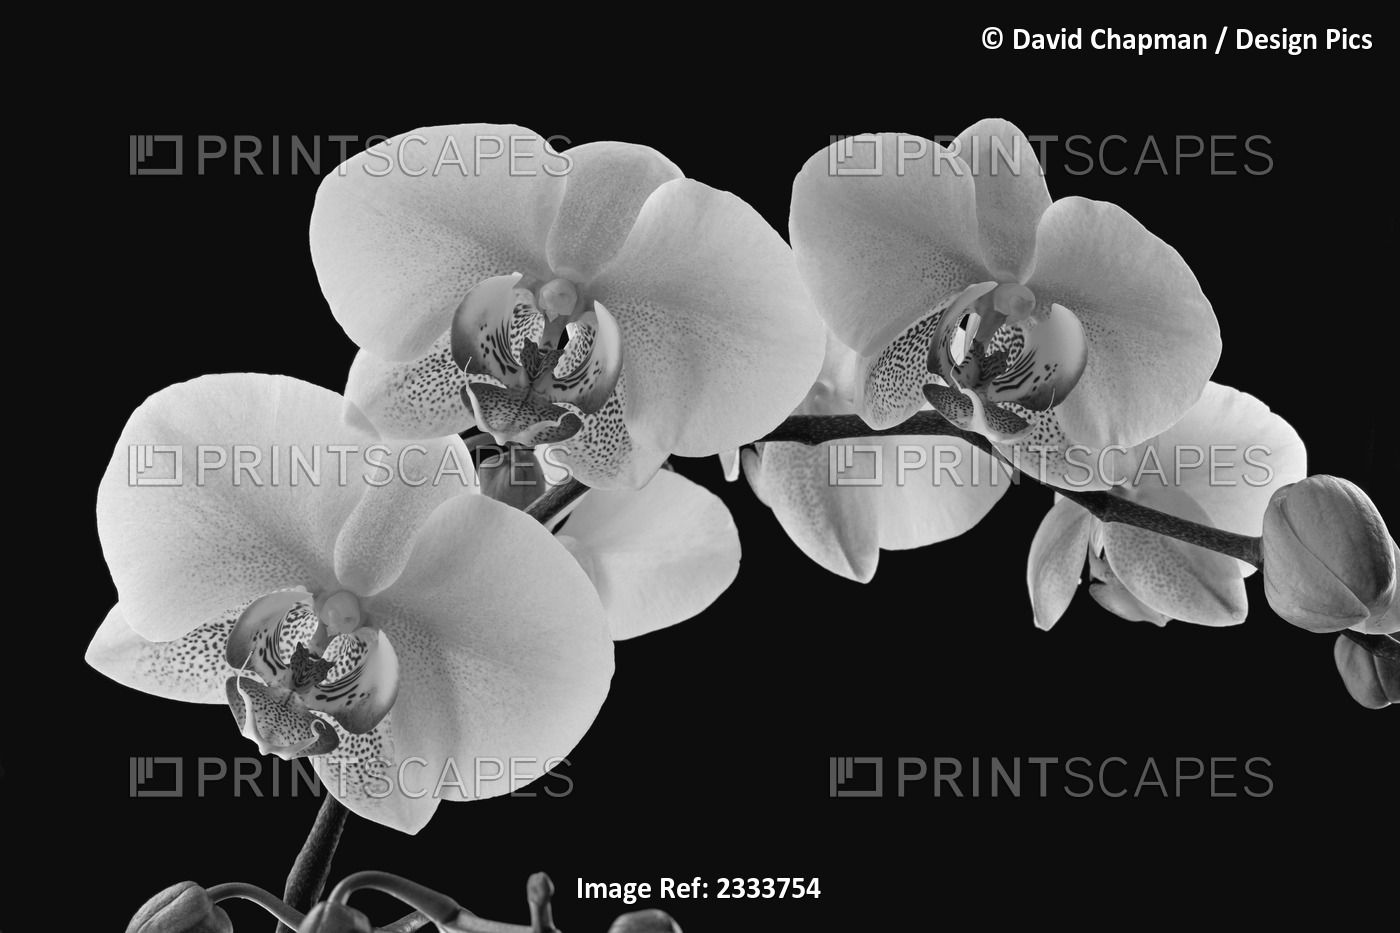 Orchids on a black background; WAterloo, Quebec, Canada